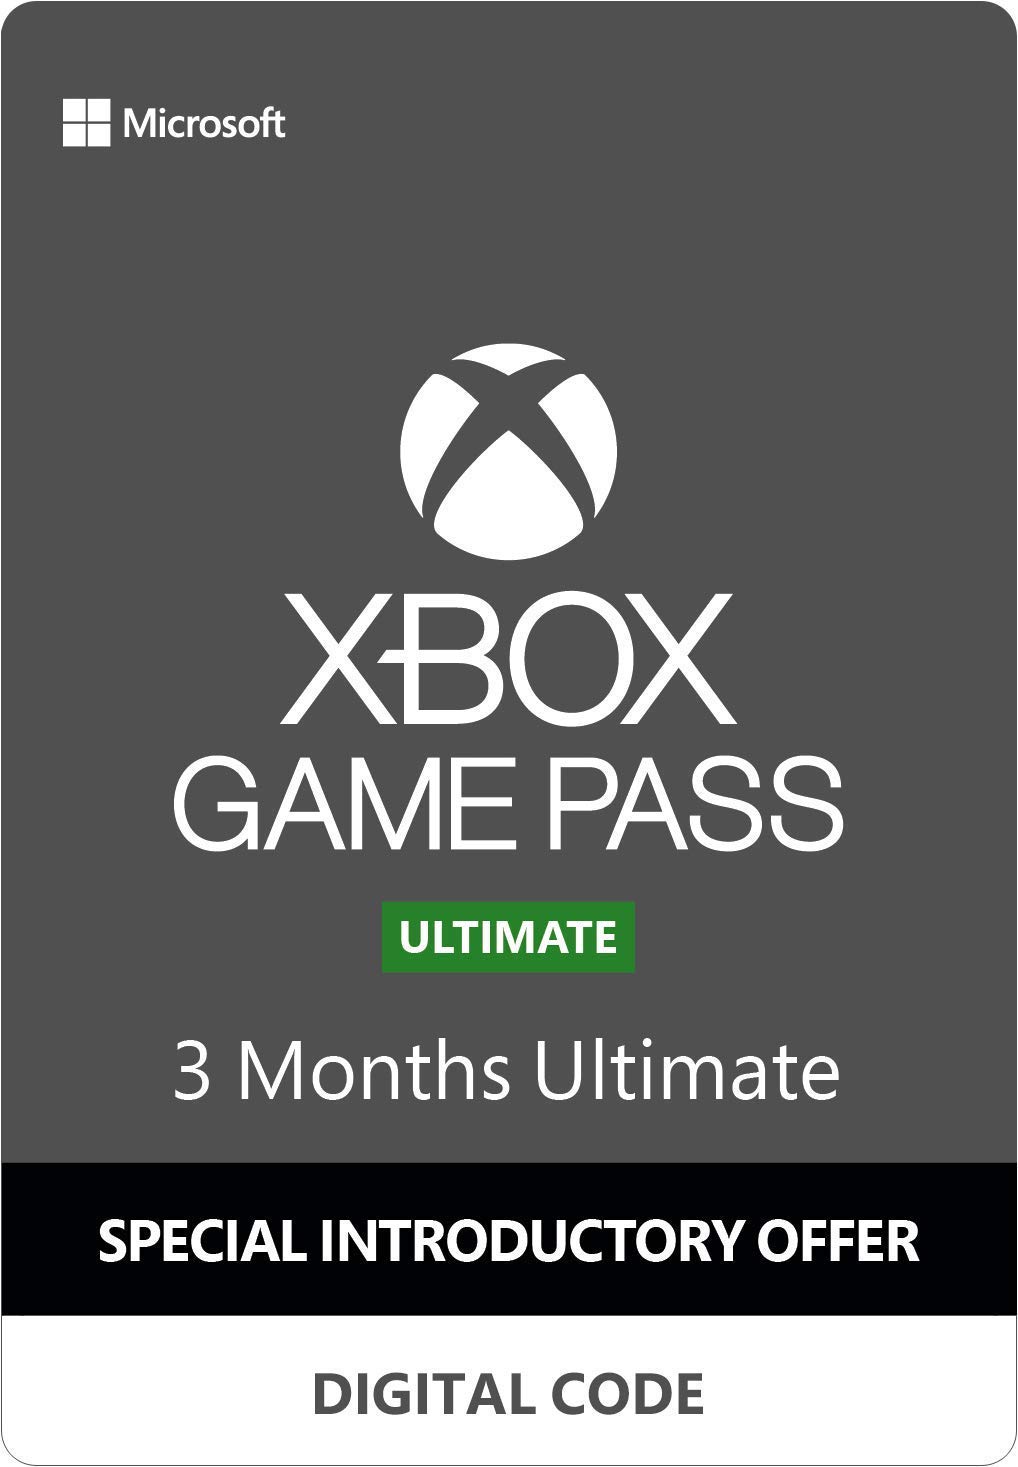 xbox ultimate game pass 3 months $1